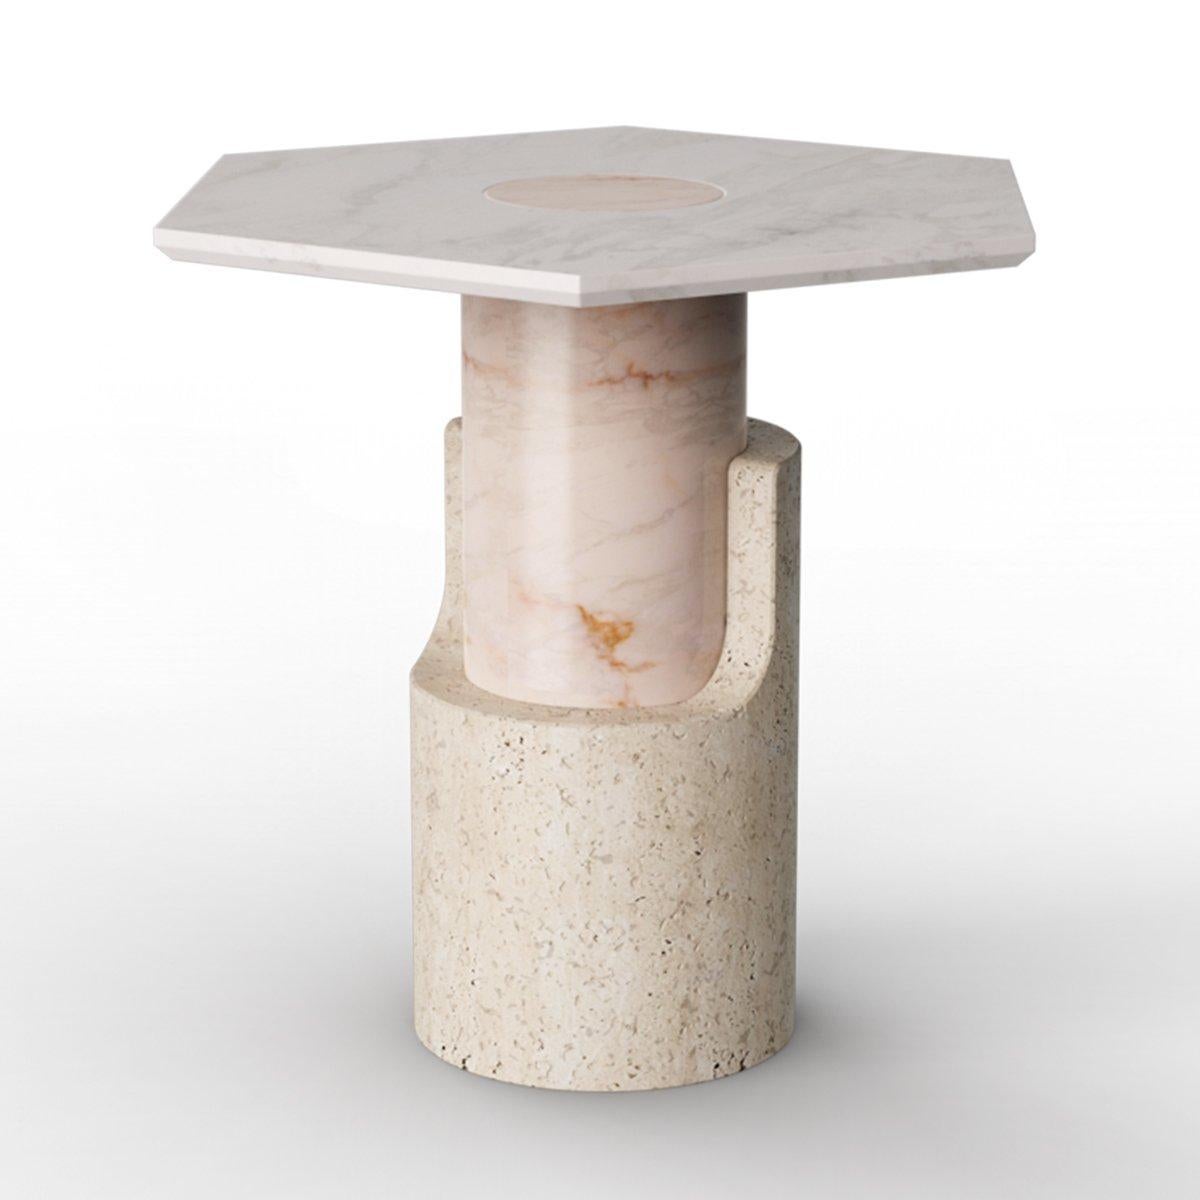 Pair of Braque Contemporary Marble Side Tables by Dooq

Dimensions:
W 60 x D 60 x H 55 cm

Materials and finishes
Entirely handmade in marble

Product
The Braque side table is an elegant and slick side table created by Dooq. Braque is entirely hand